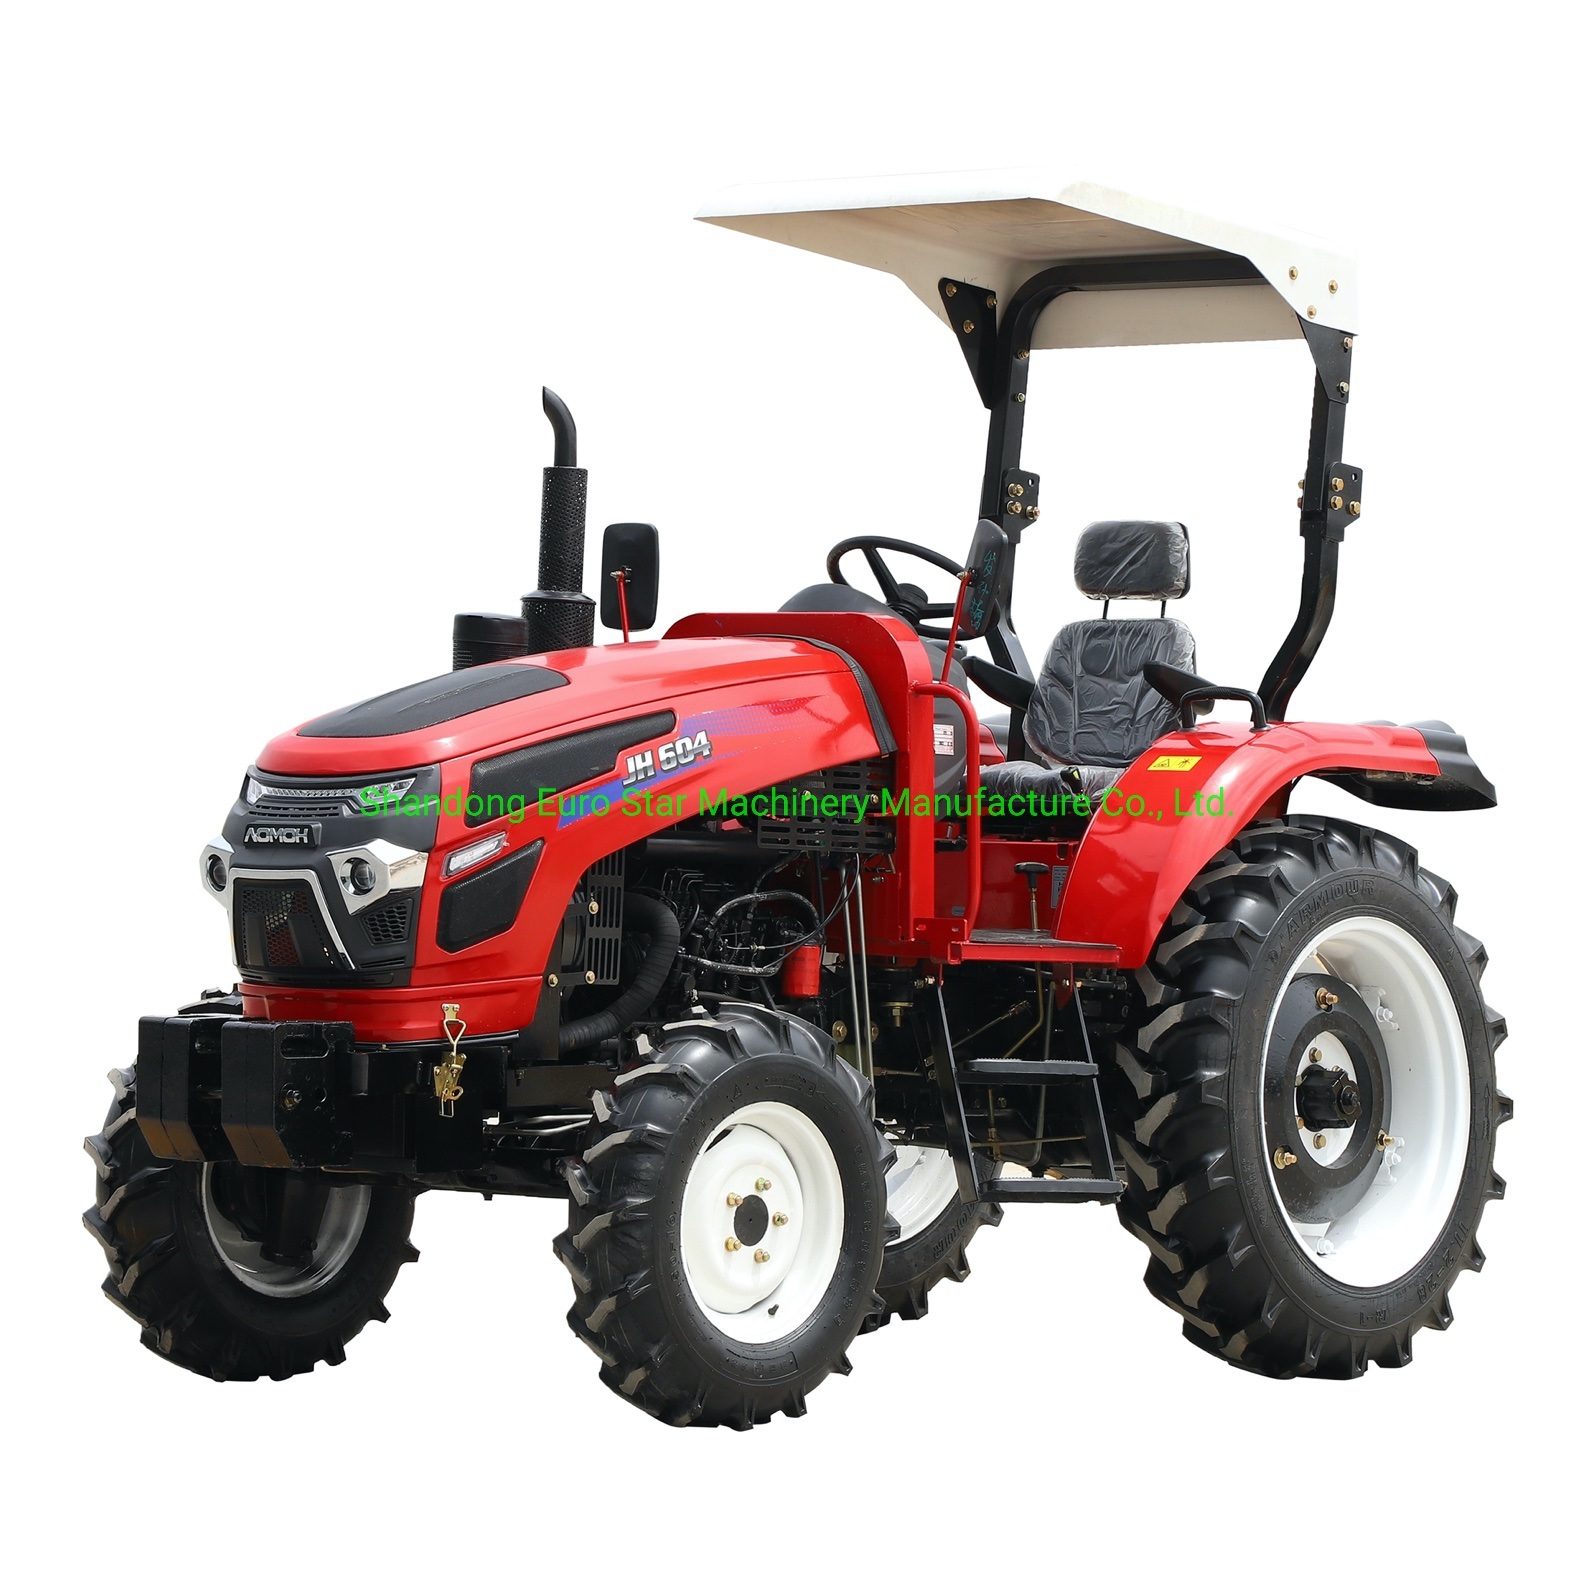 E-4WD-30HP-Mini-Orchard-Tractor-Small-Four-Wheel-Farm-Crawler-Paddy-Lawn-Big-Garden-Walking-Diesel-China-Tractor-for-Agricultural-Machinery-Machine-Es3048e-CE.jpg